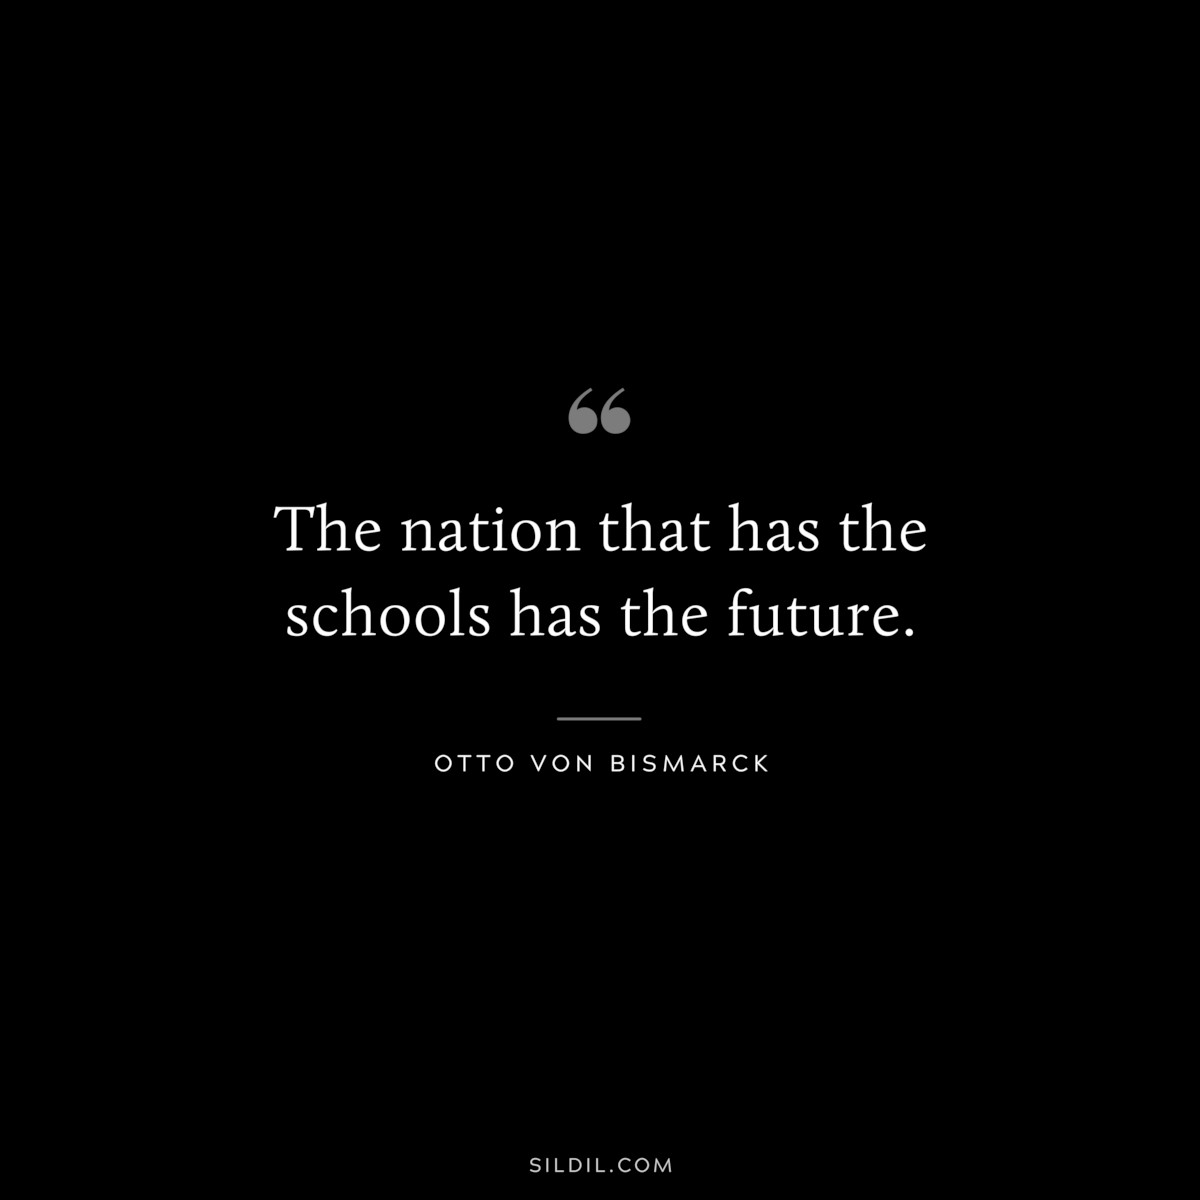 The nation that has the schools has the future. ― Otto von Bismarck